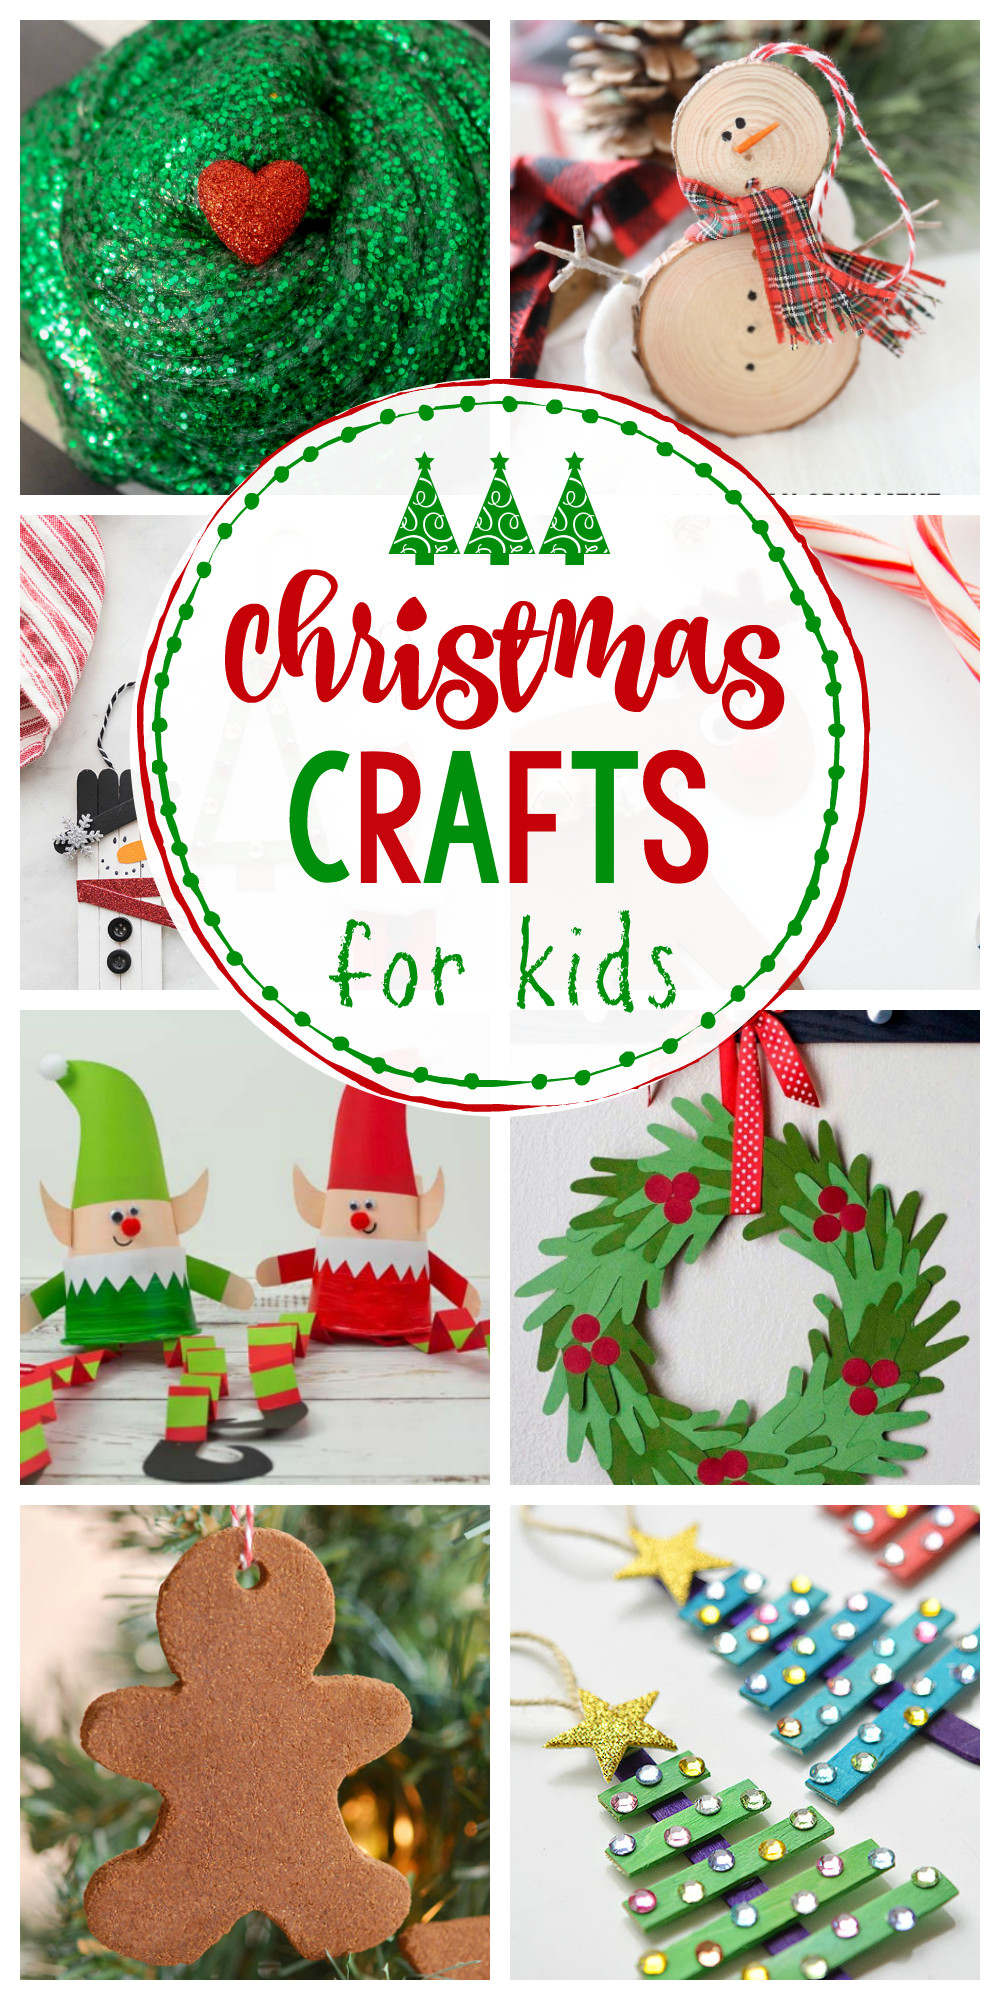 Free Craft Ideas For Kids
 25 Easy Christmas Crafts for Kids Crazy Little Projects